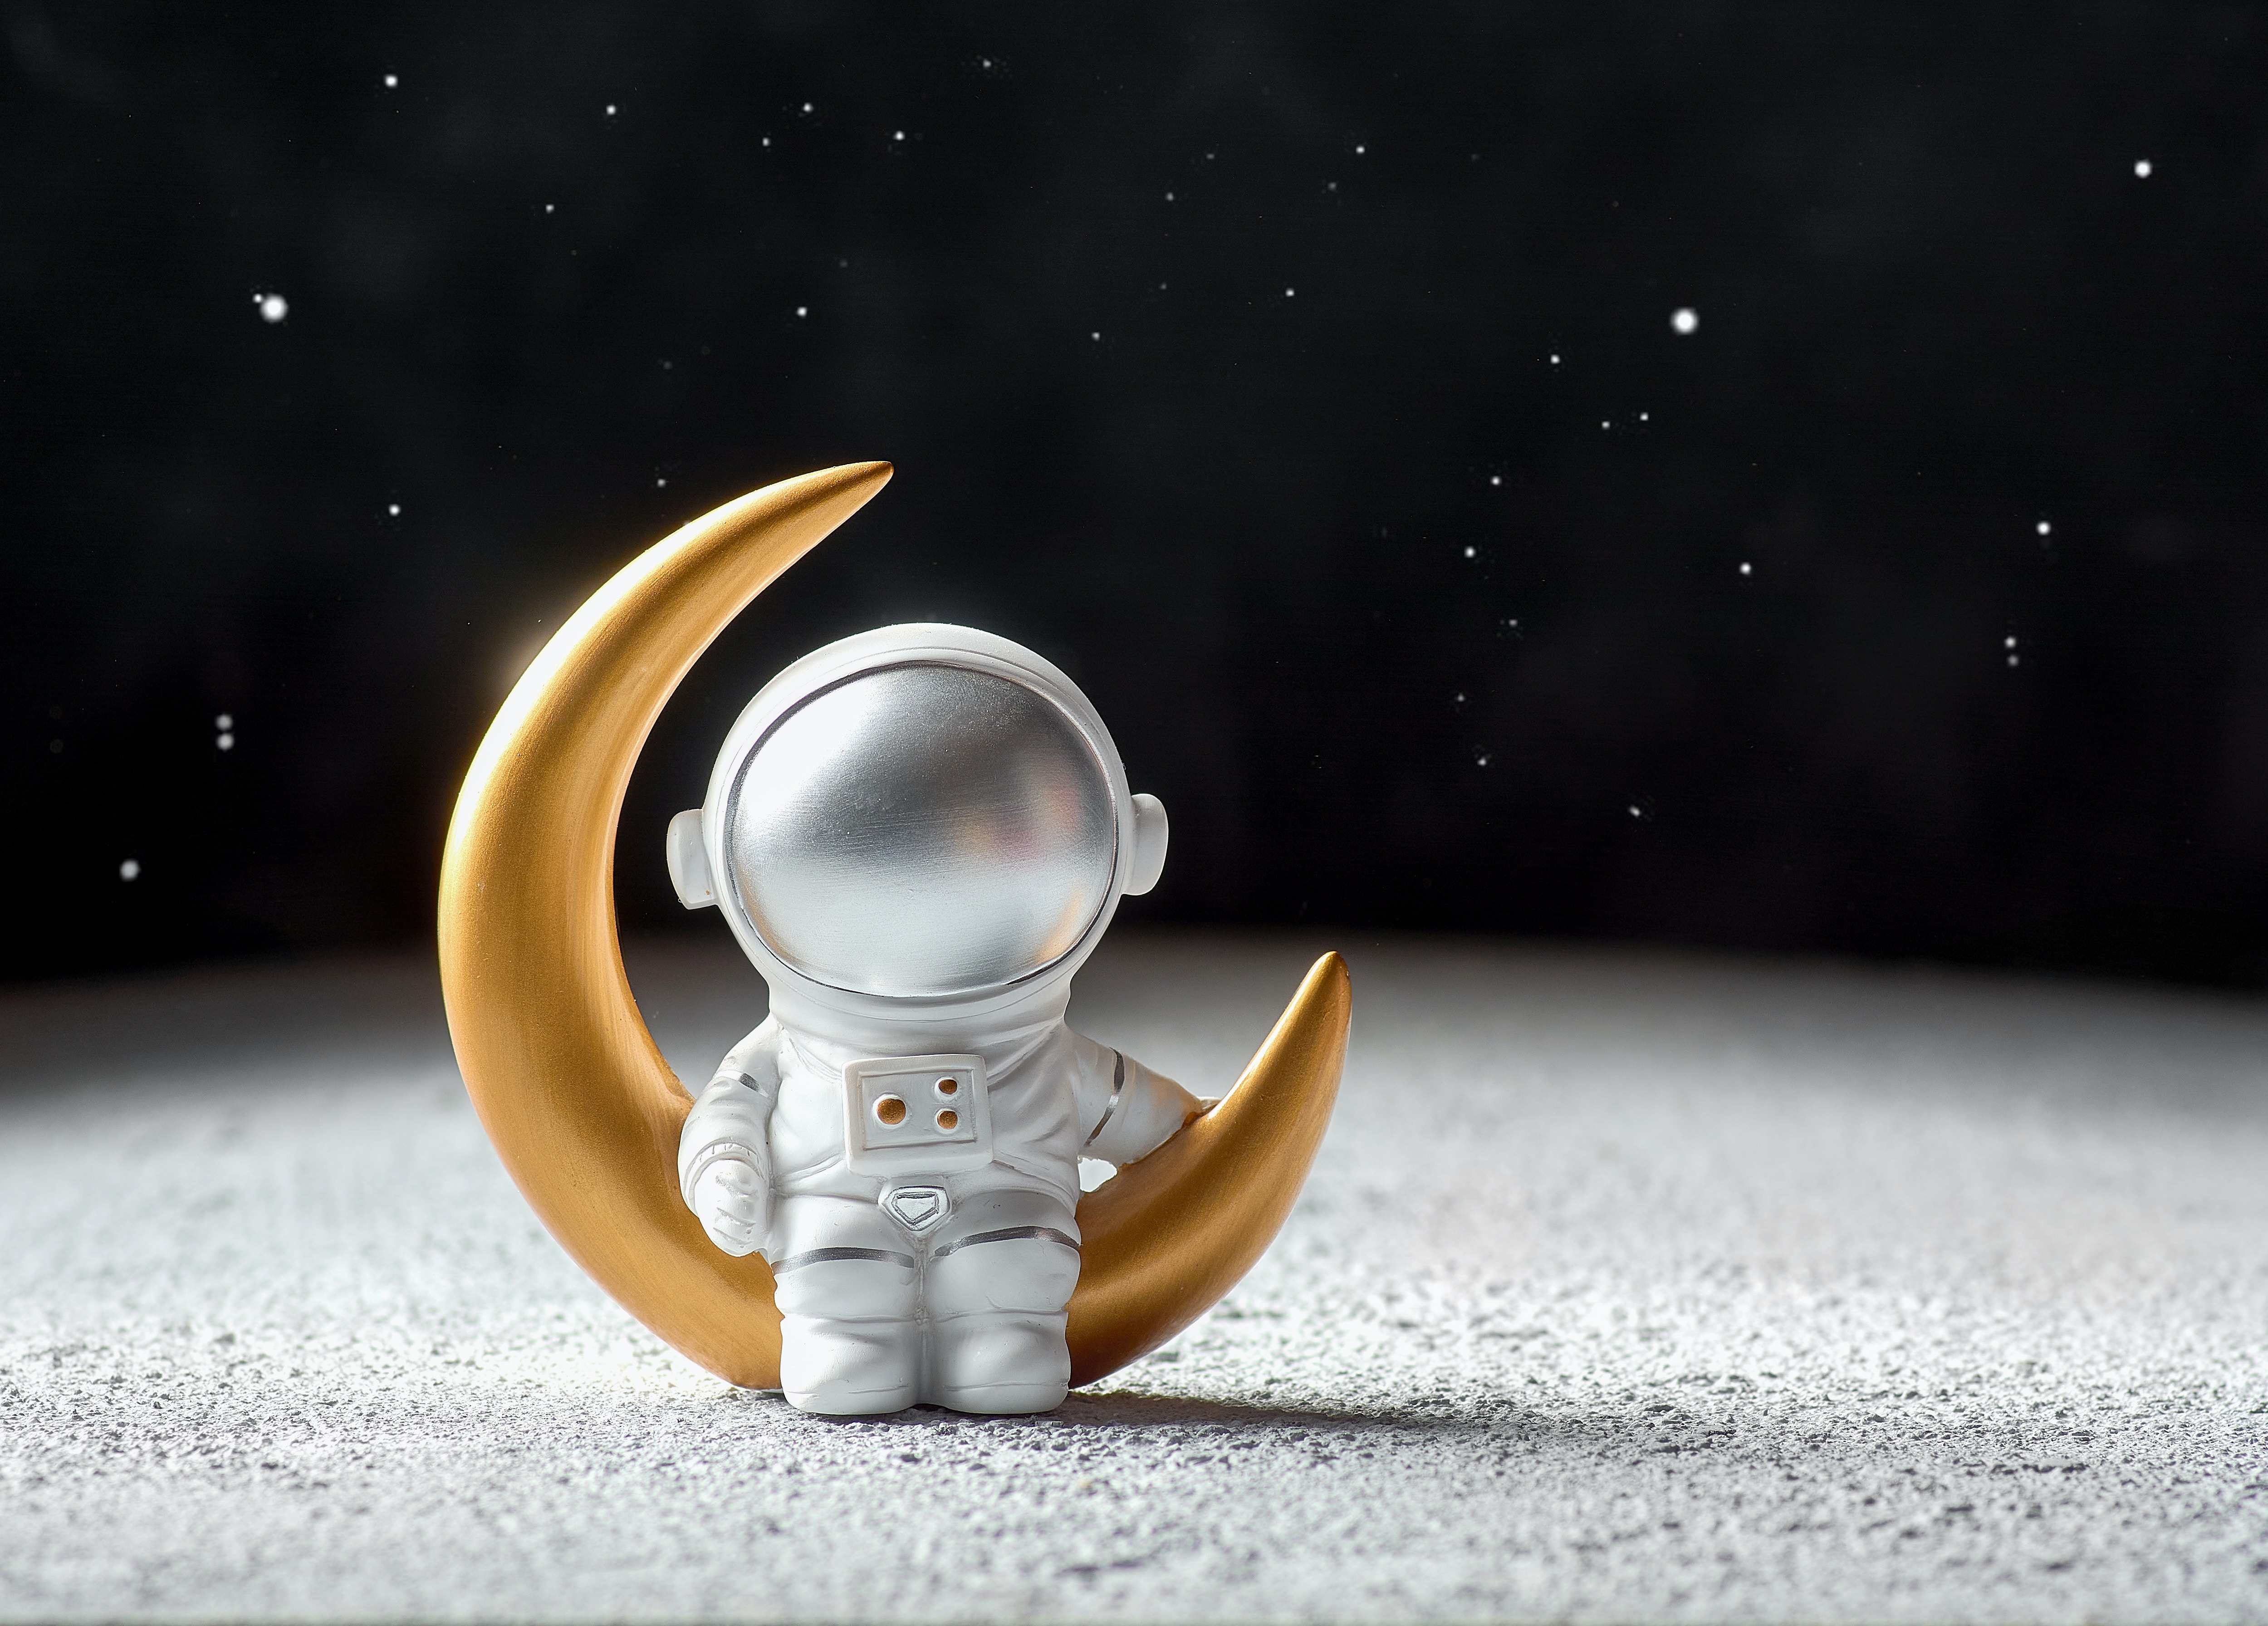 ai-generated image of a spaceman toy sitting on the crescent moon